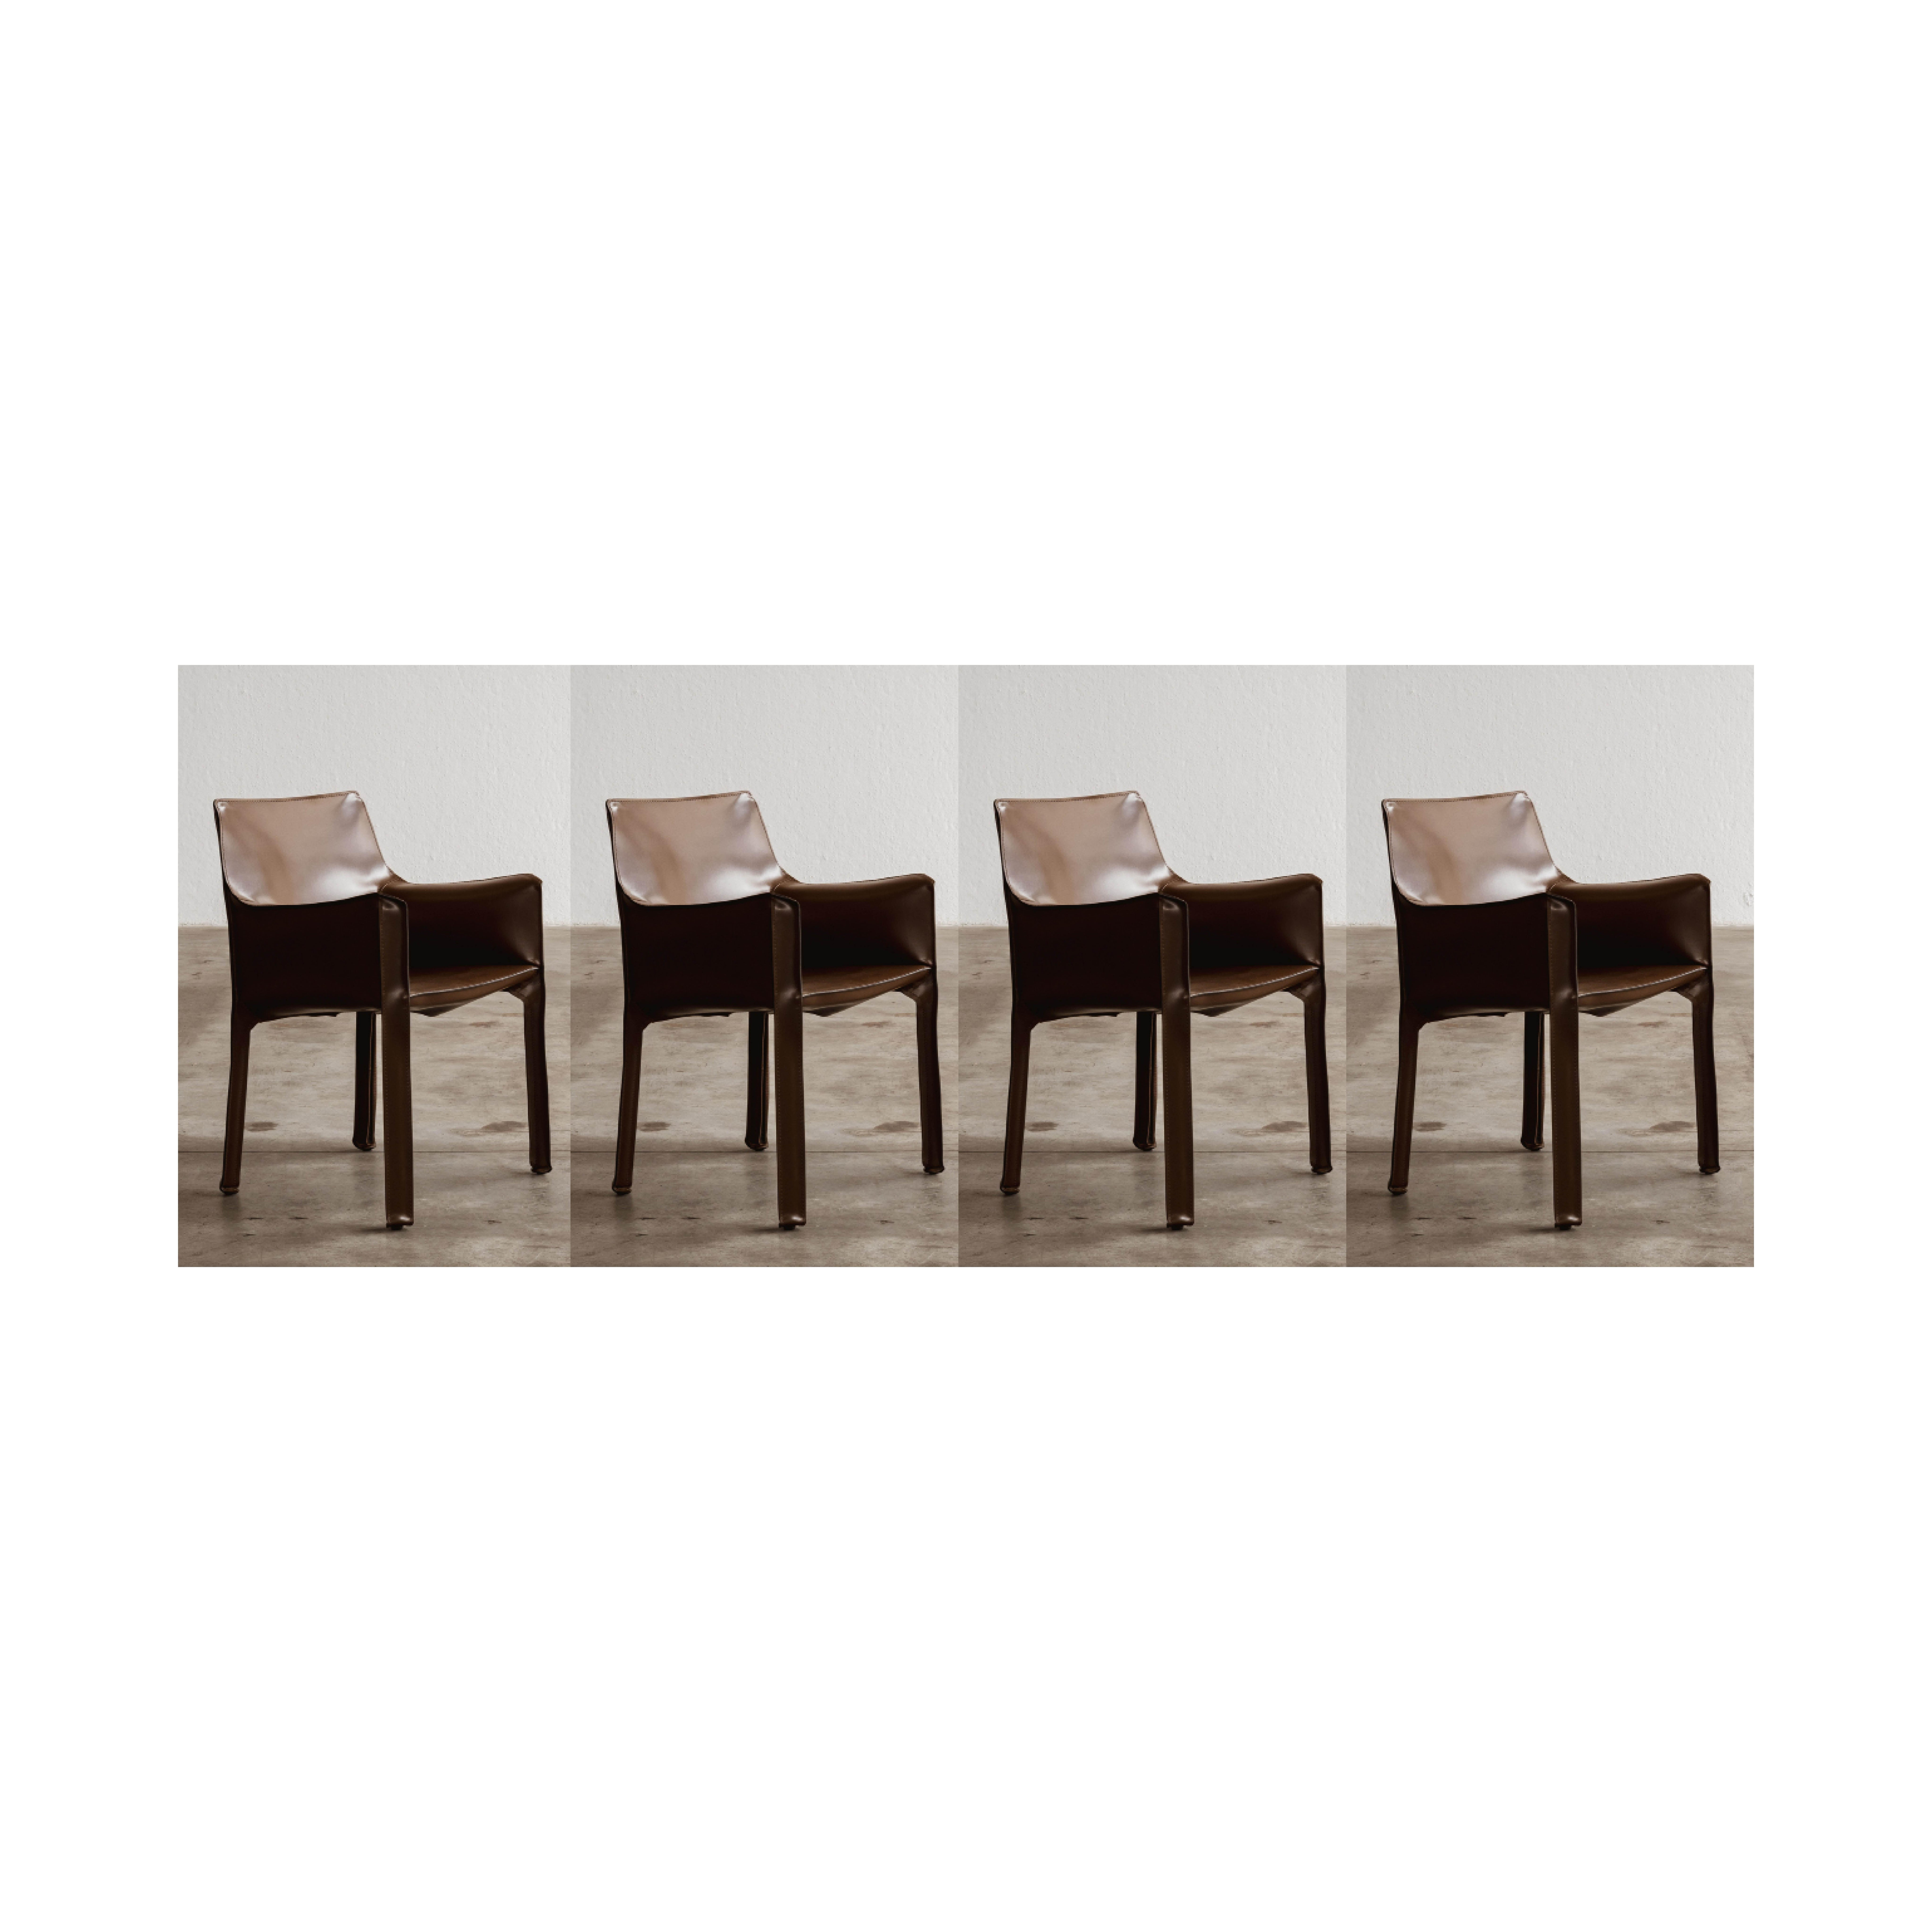 Mario Bellini "CAB 413" Chairs for Cassina in Dark Brown, 1977, Set of 4 For Sale